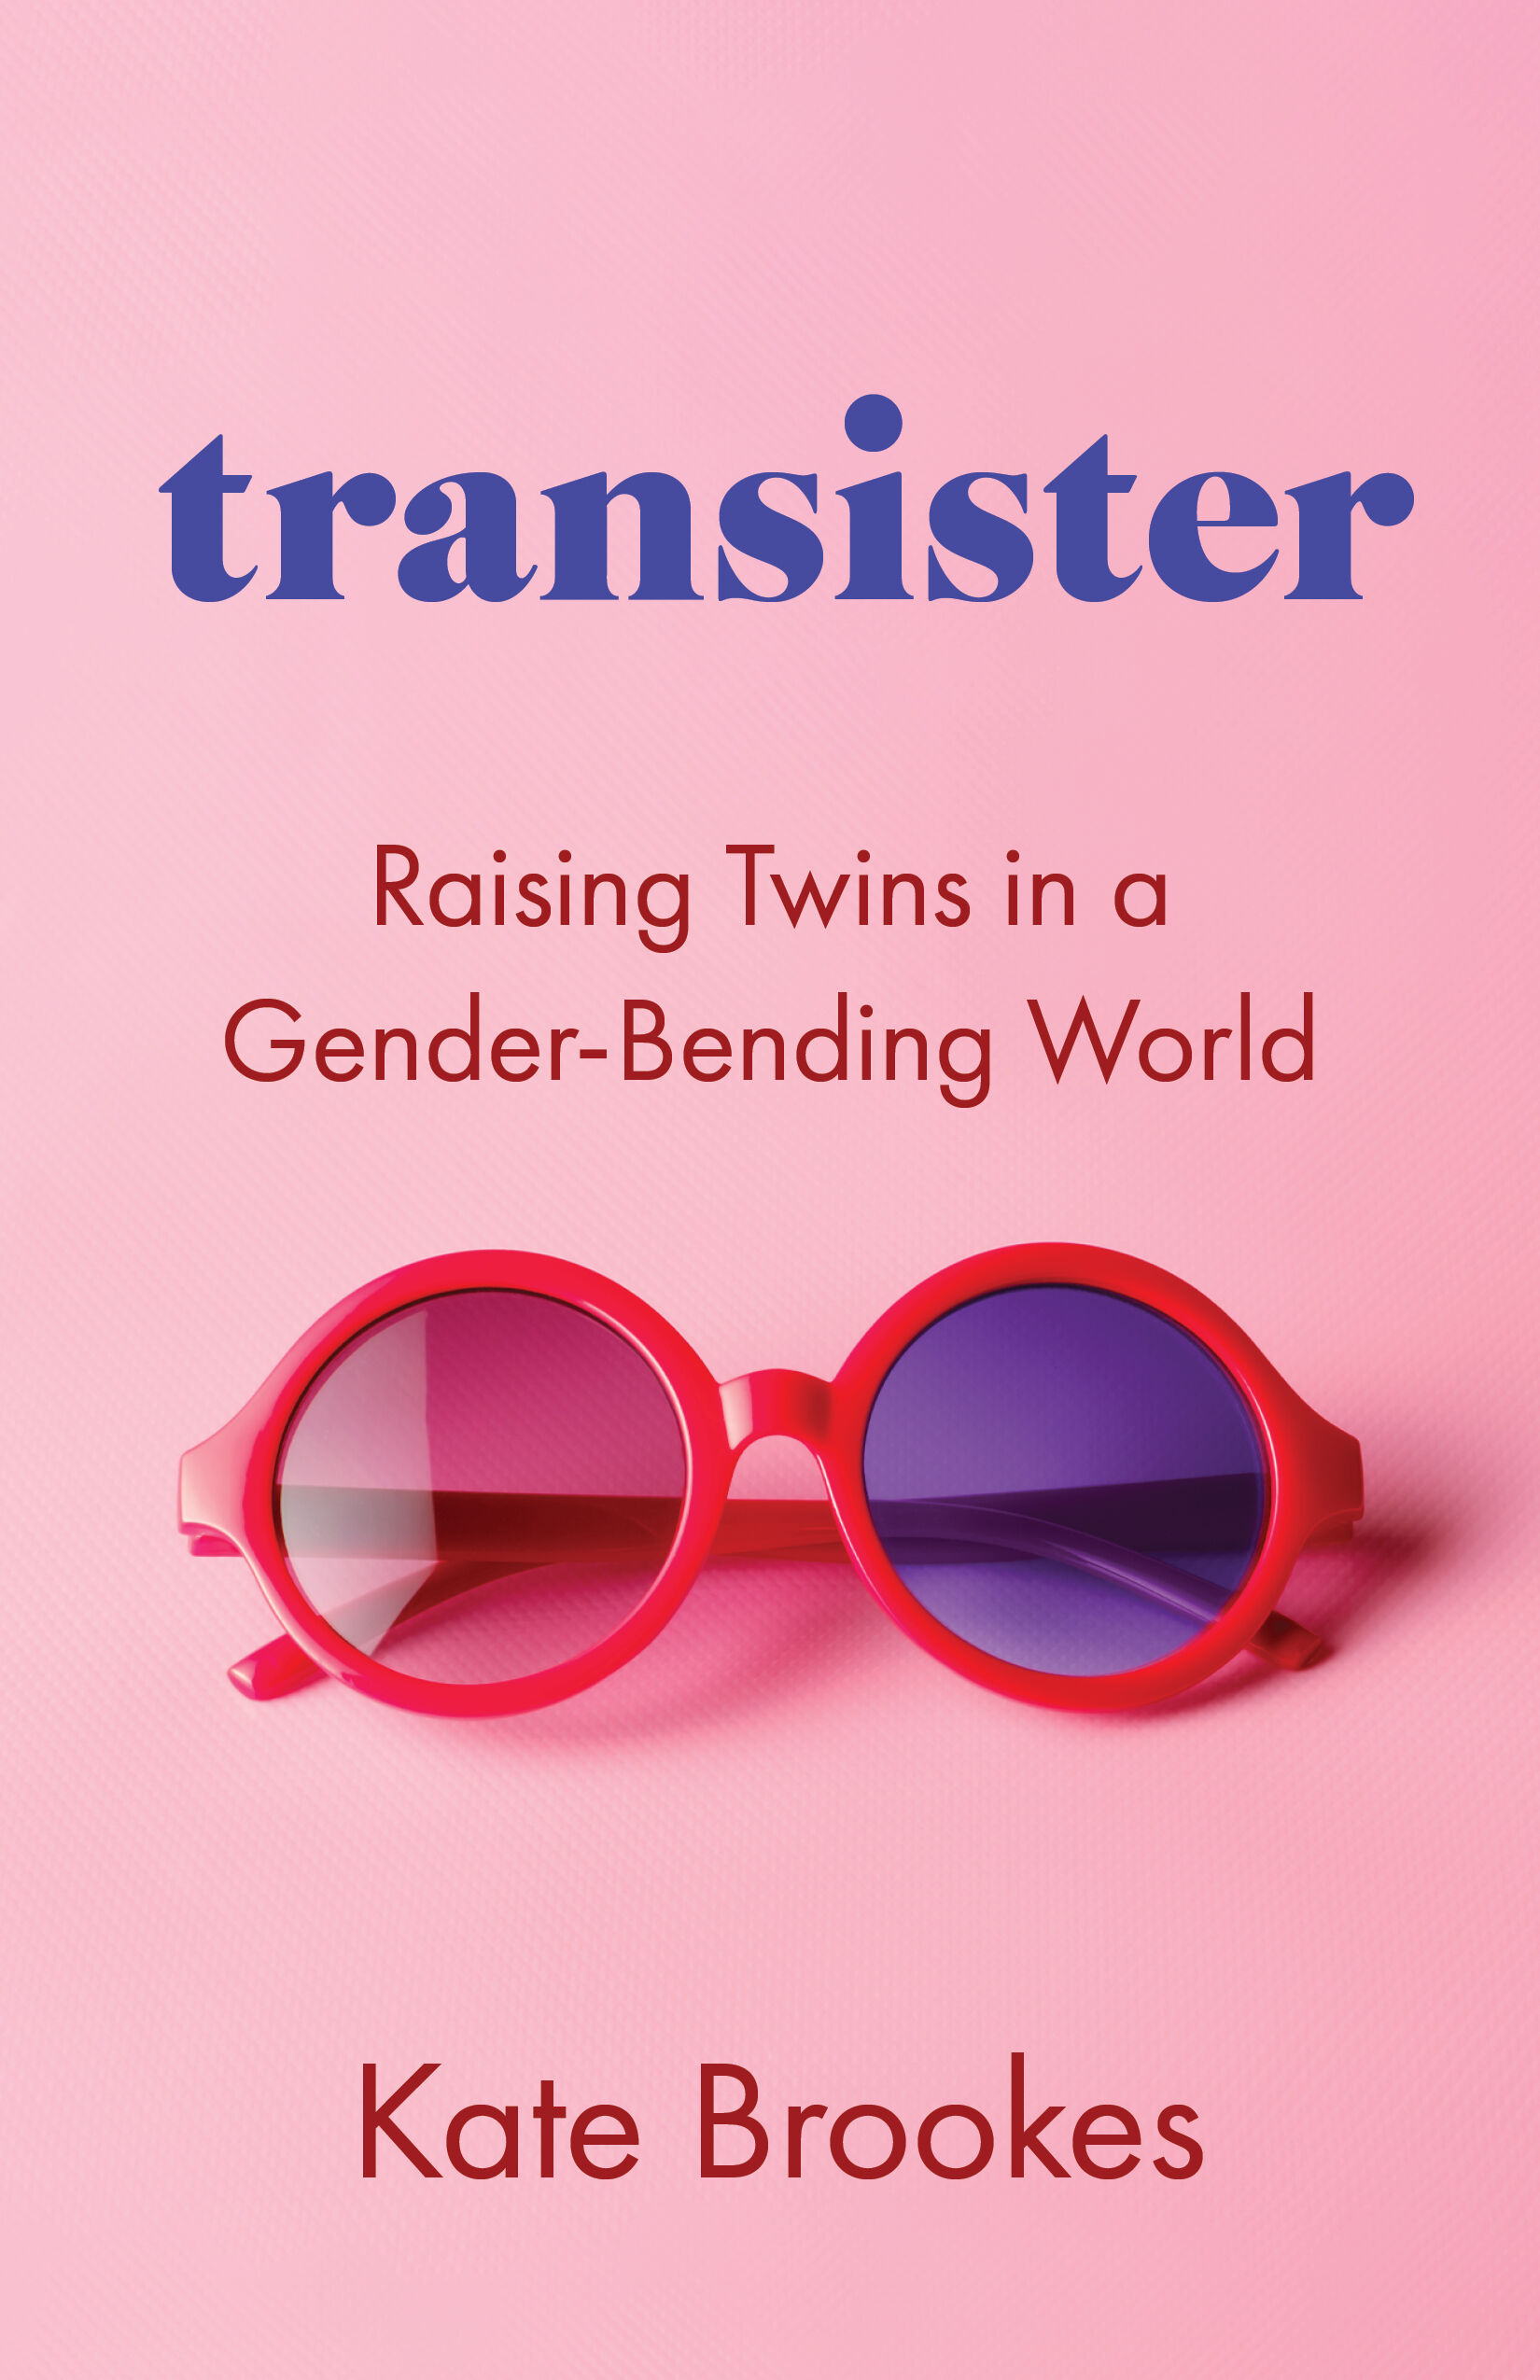 Kate Brookes' new book, Transister